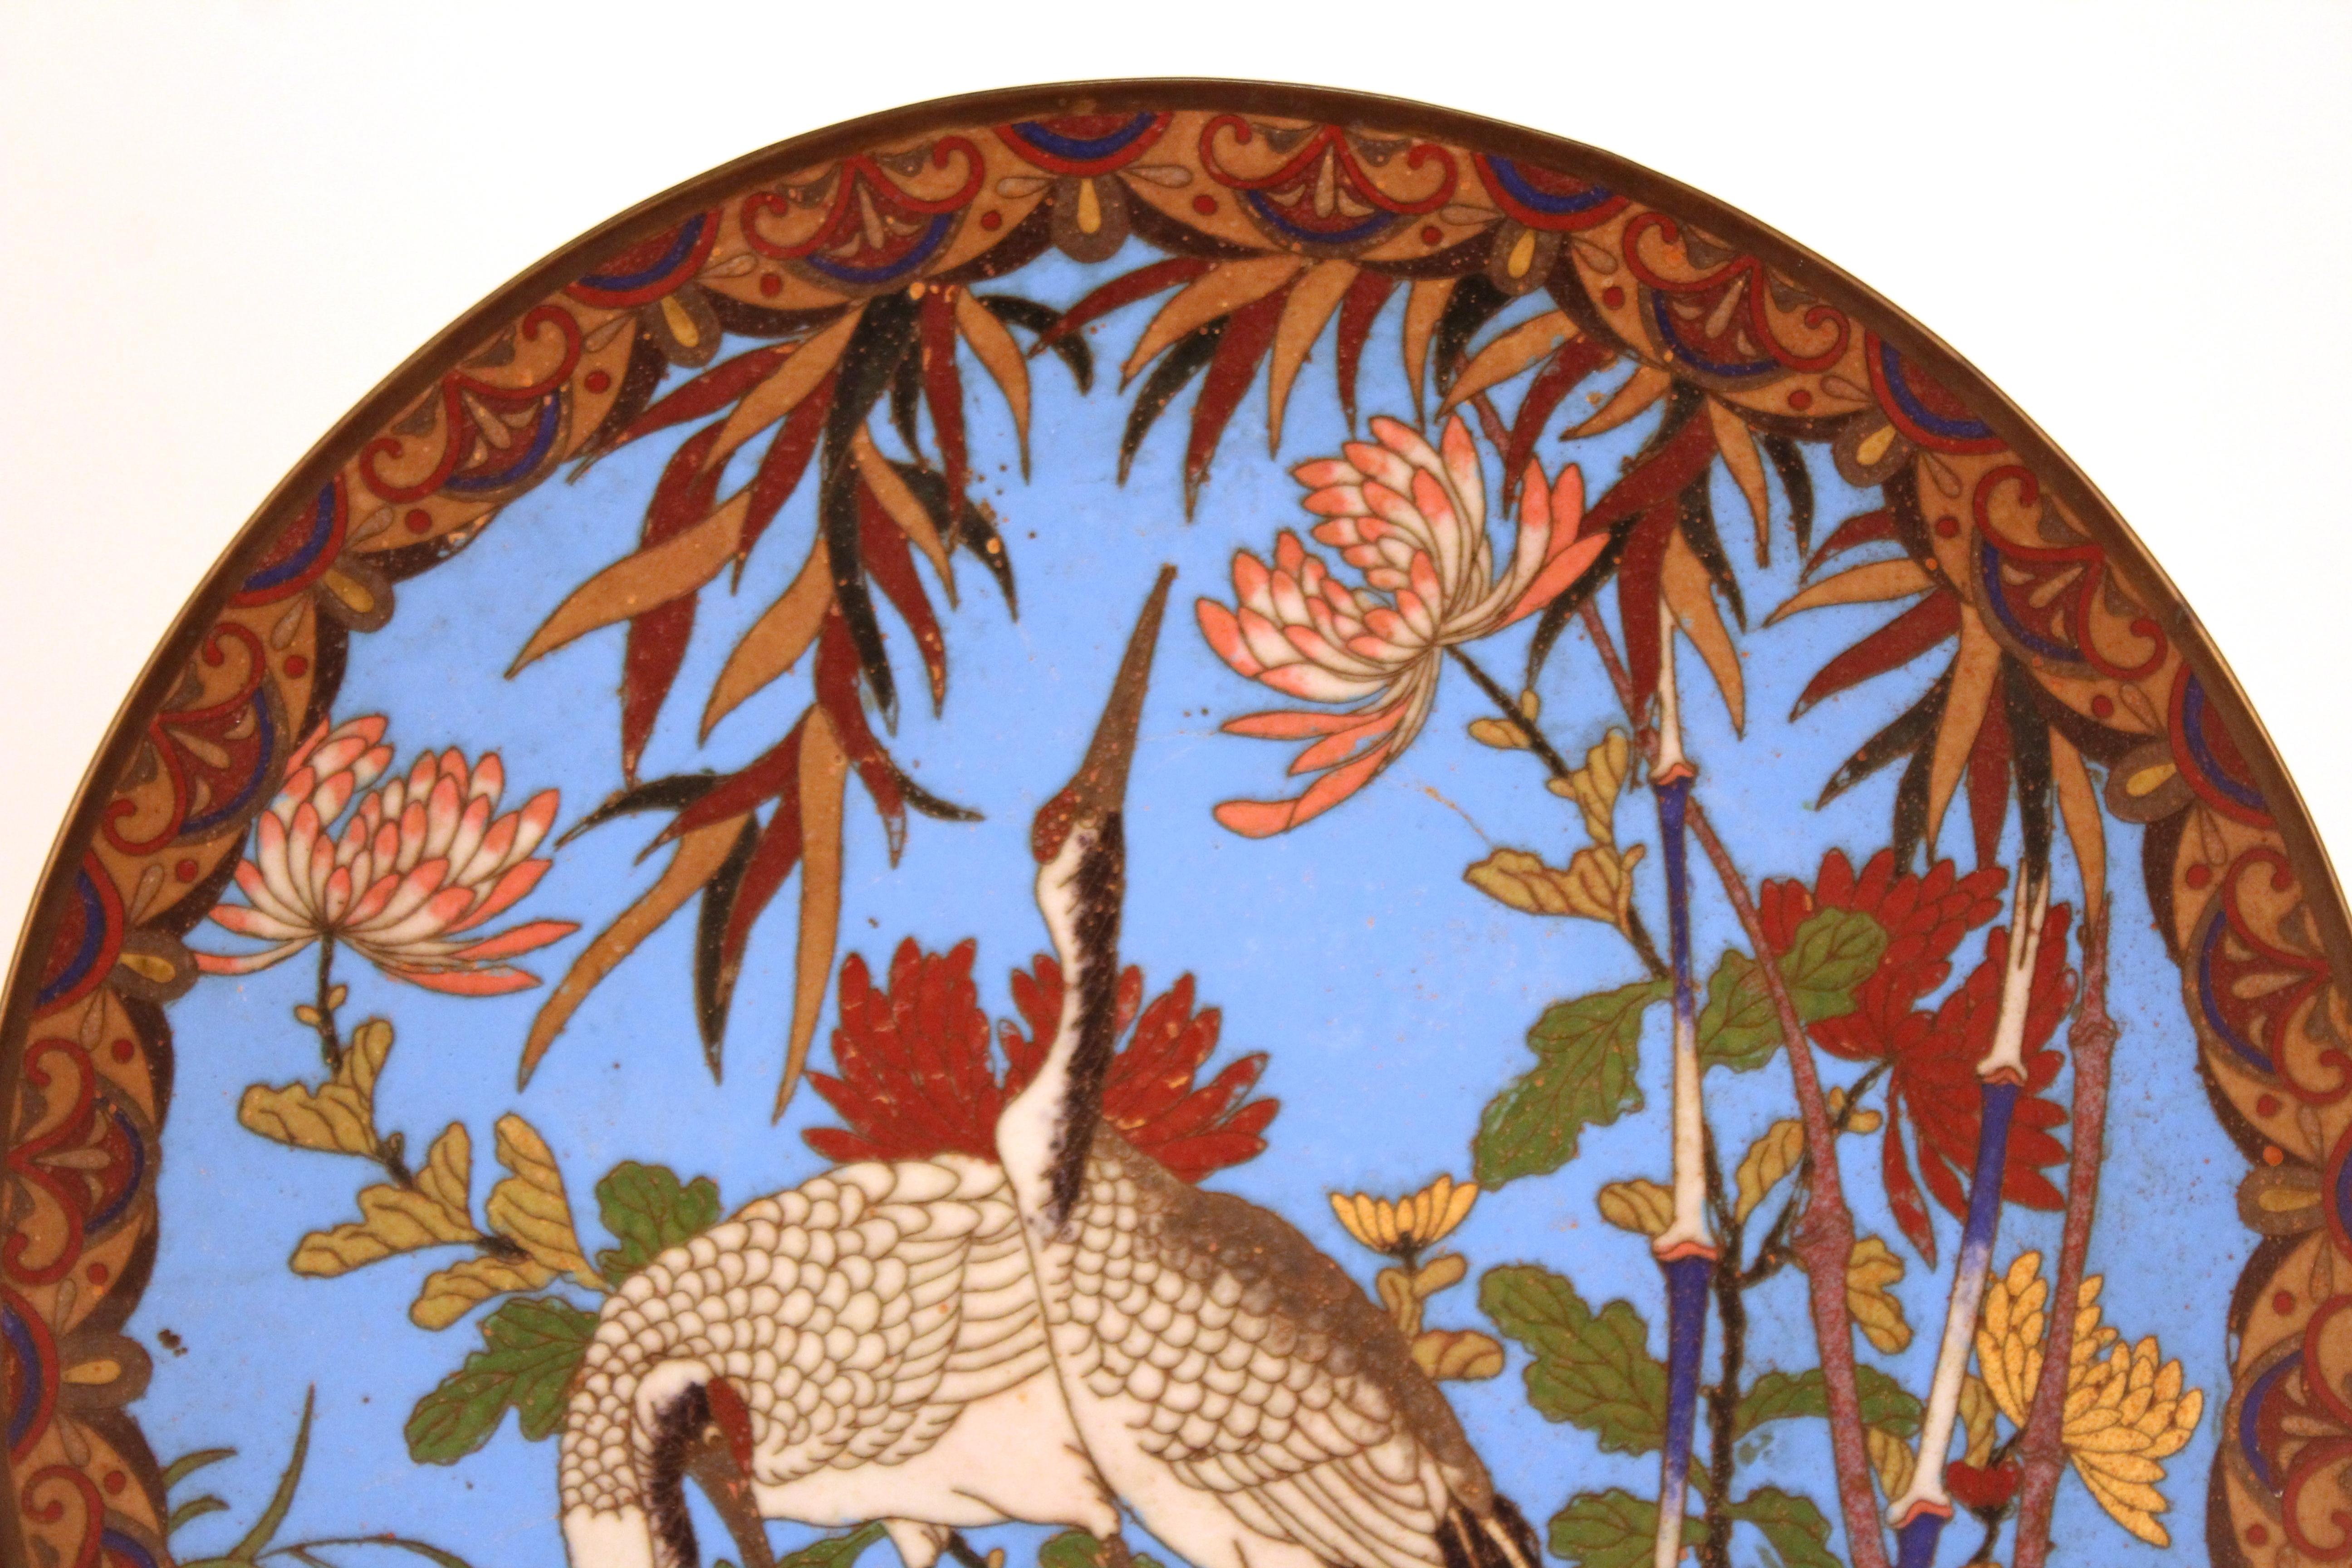 Japanese Meiji period plate with colorful cloisonne enamel, depicting two cranes and a chrysanthemum pattern on the border. The piece has a blue enameled back side and was made in circa 1900. In great antique condition with age-appropriate wear and